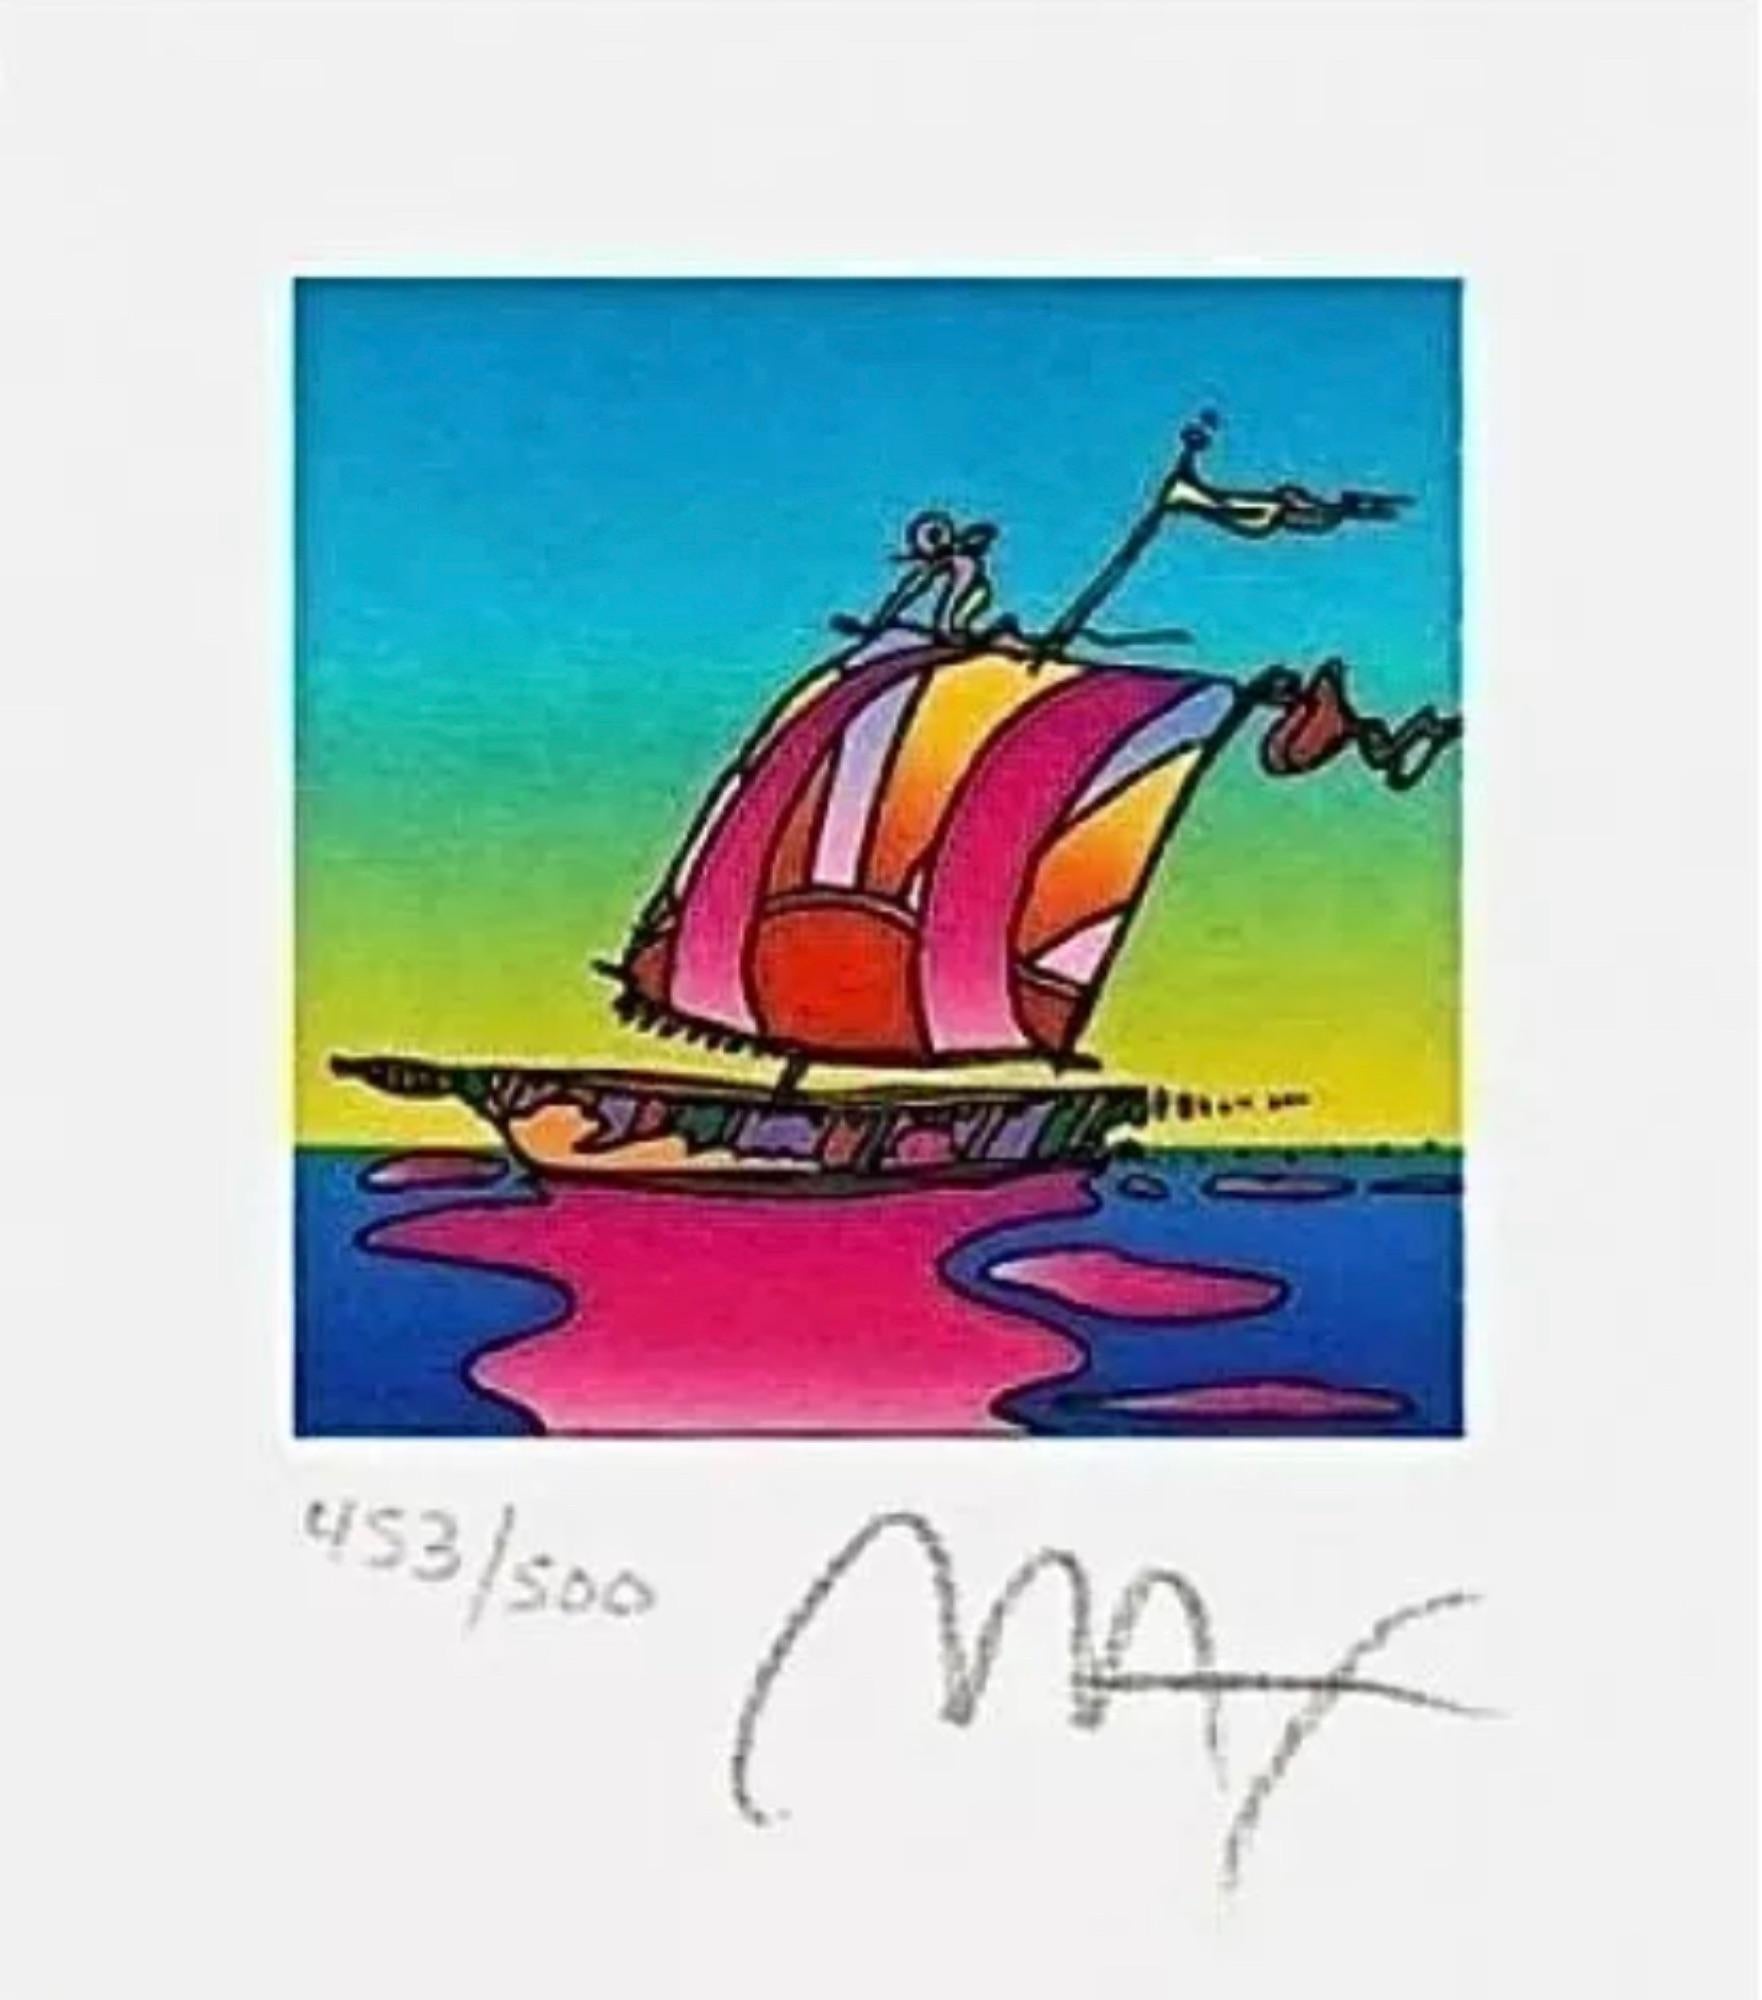 Artist: Peter Max (1937)
Title: Cosmic Sailboat
Year: 2003
Edition: 453/500, plus proofs
Medium: Lithograph on Lustro Saxony paper
Size: 3.43 x 2.62 inches
Condition: Excellent
Inscription: Signed and numbered by the artist.
Notes: Published by Via